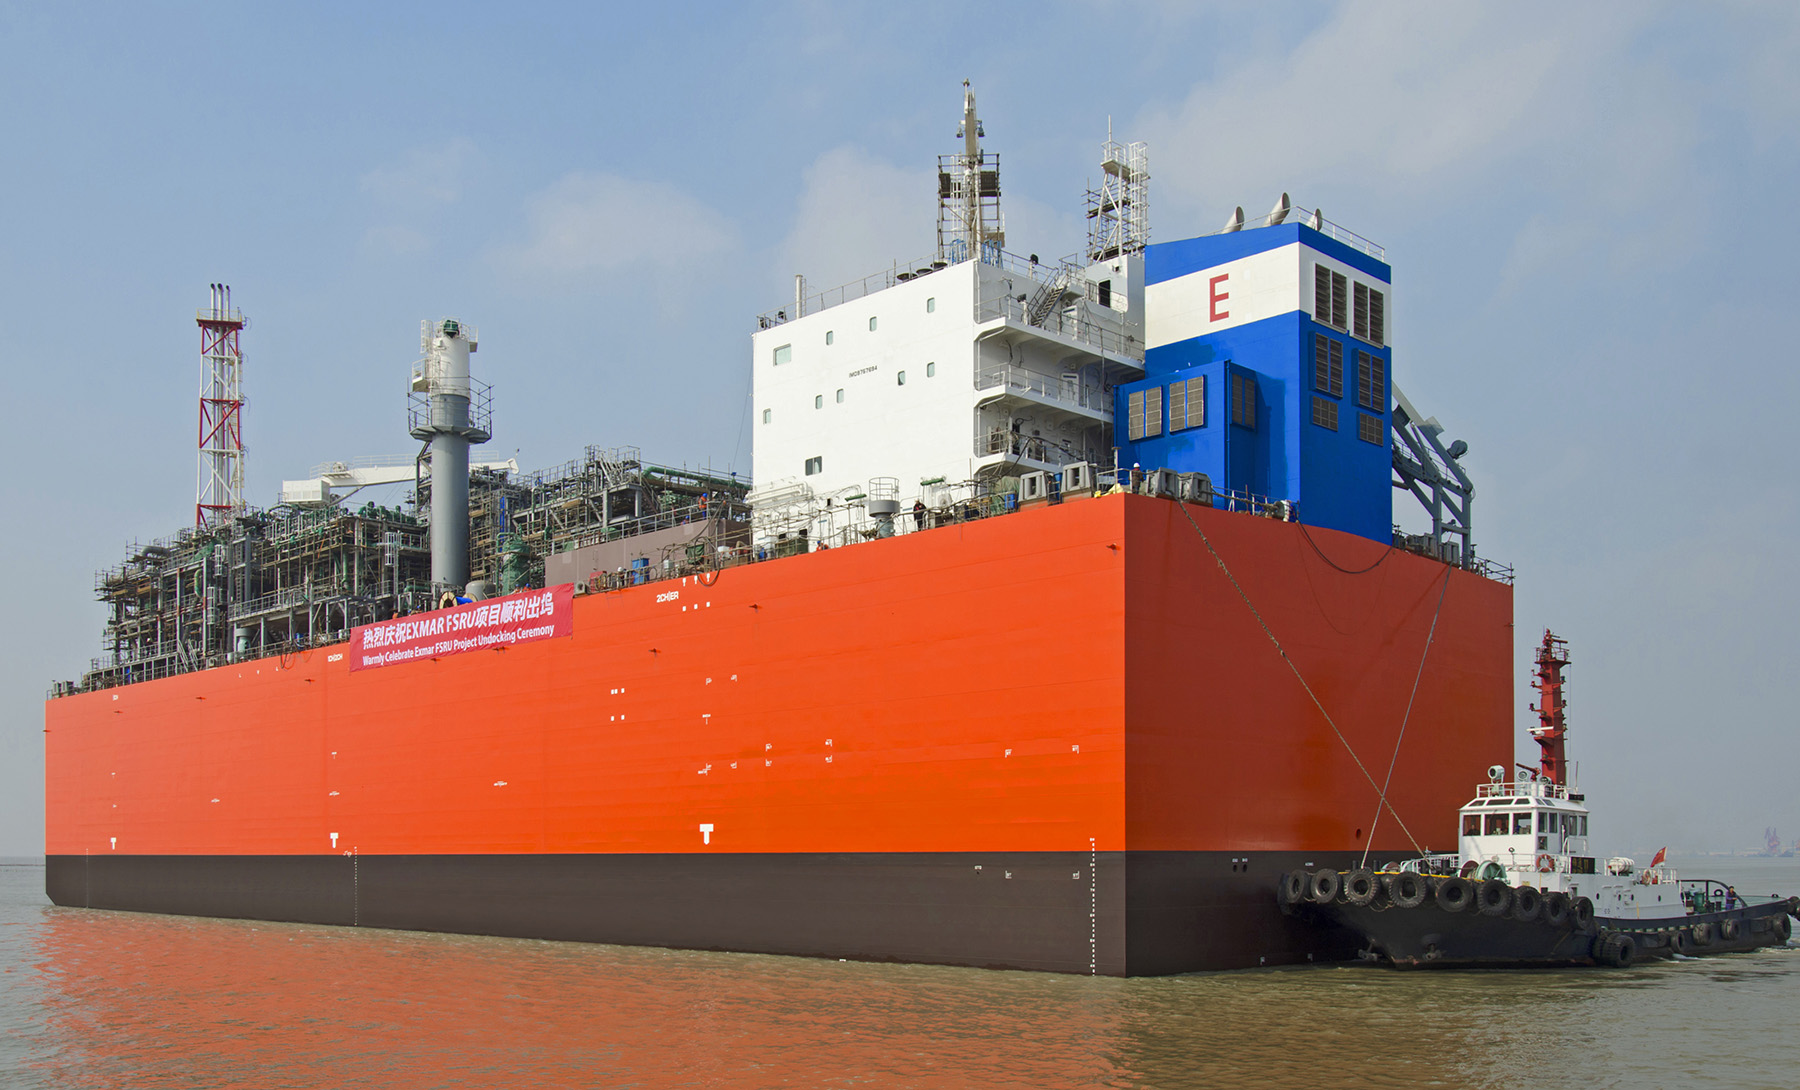 EXMAR offshore storage unit protected with Ecolock